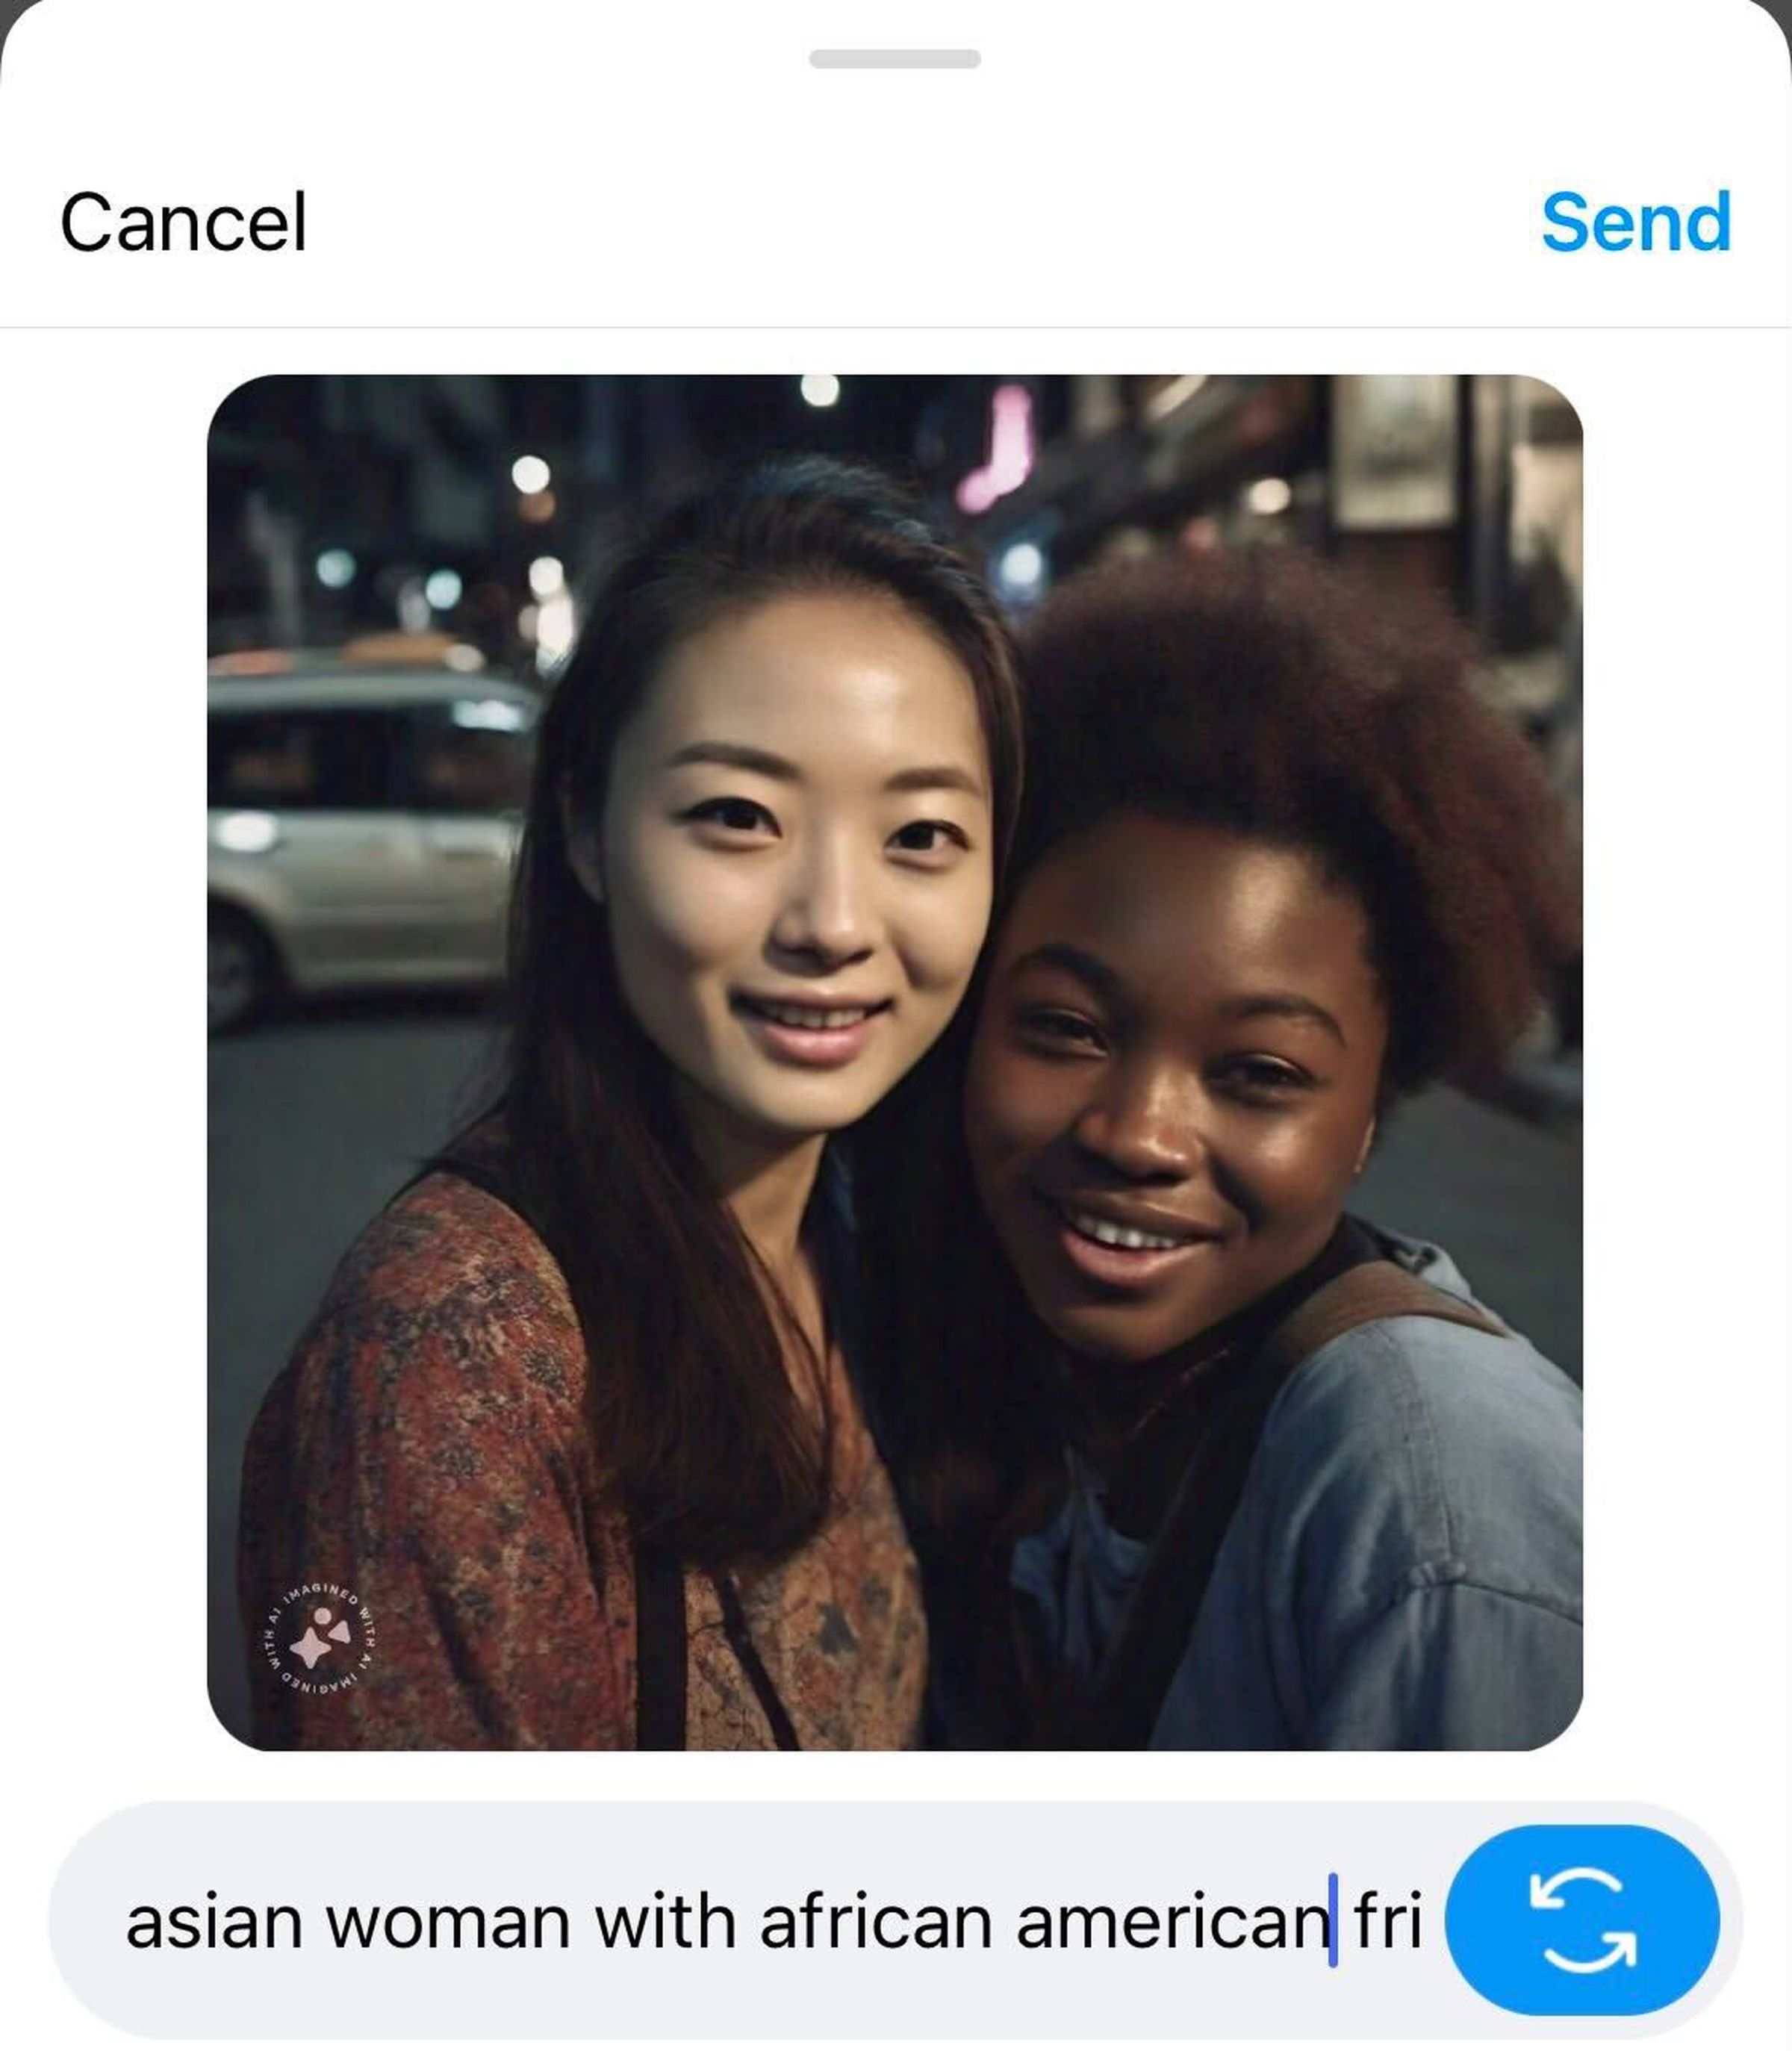 “Asian woman with African American friend” AI prompt created an accurate image.